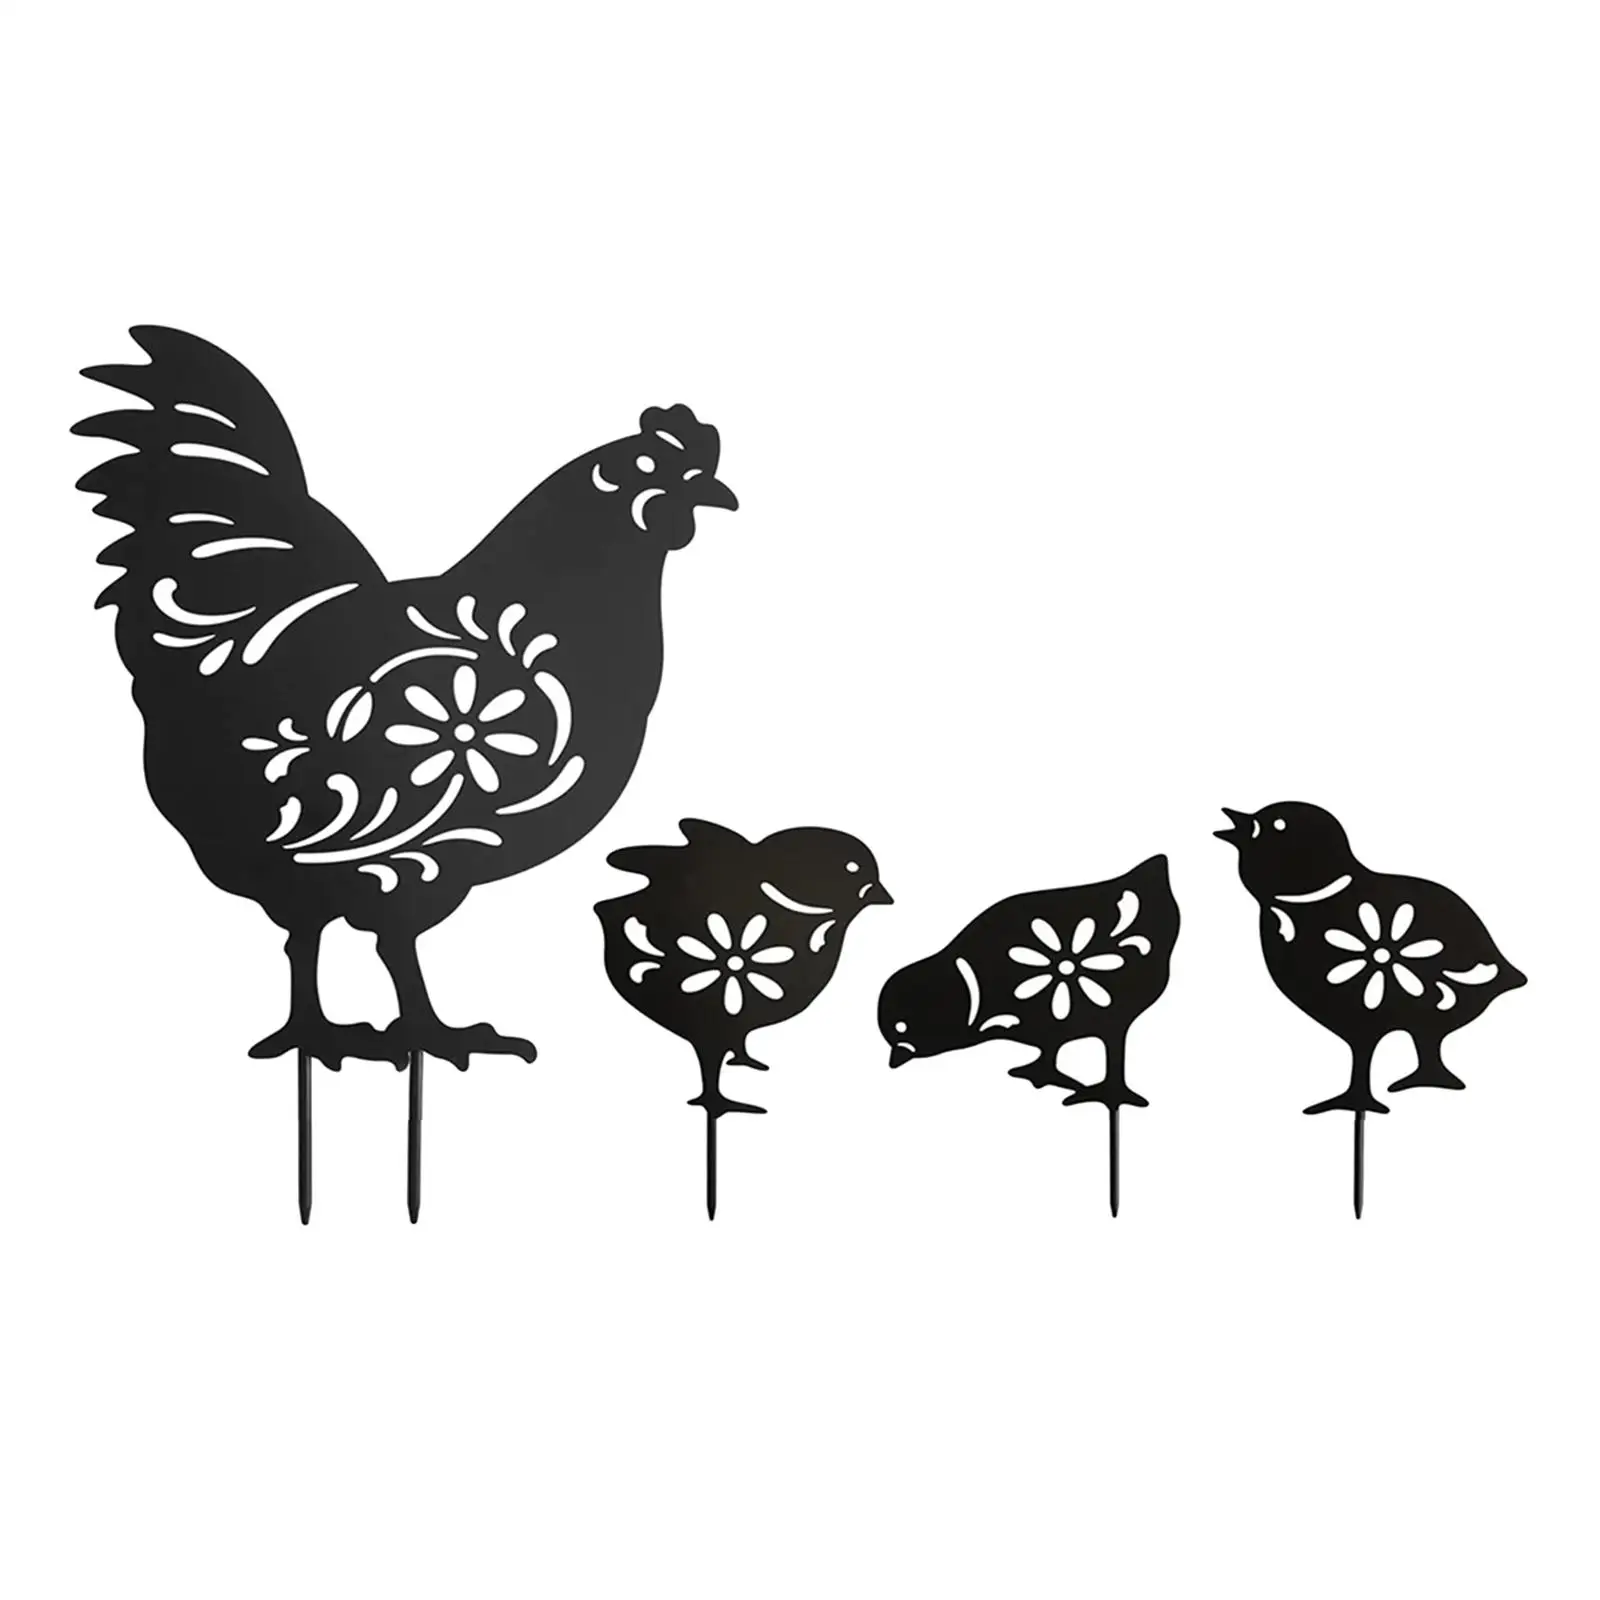 4 Pieces Garden Rooster Statue Outdoor Sign Iron Rooster Shaped Yard Stake Chicken Yard Art Decor for Farm Backyard Courtyard